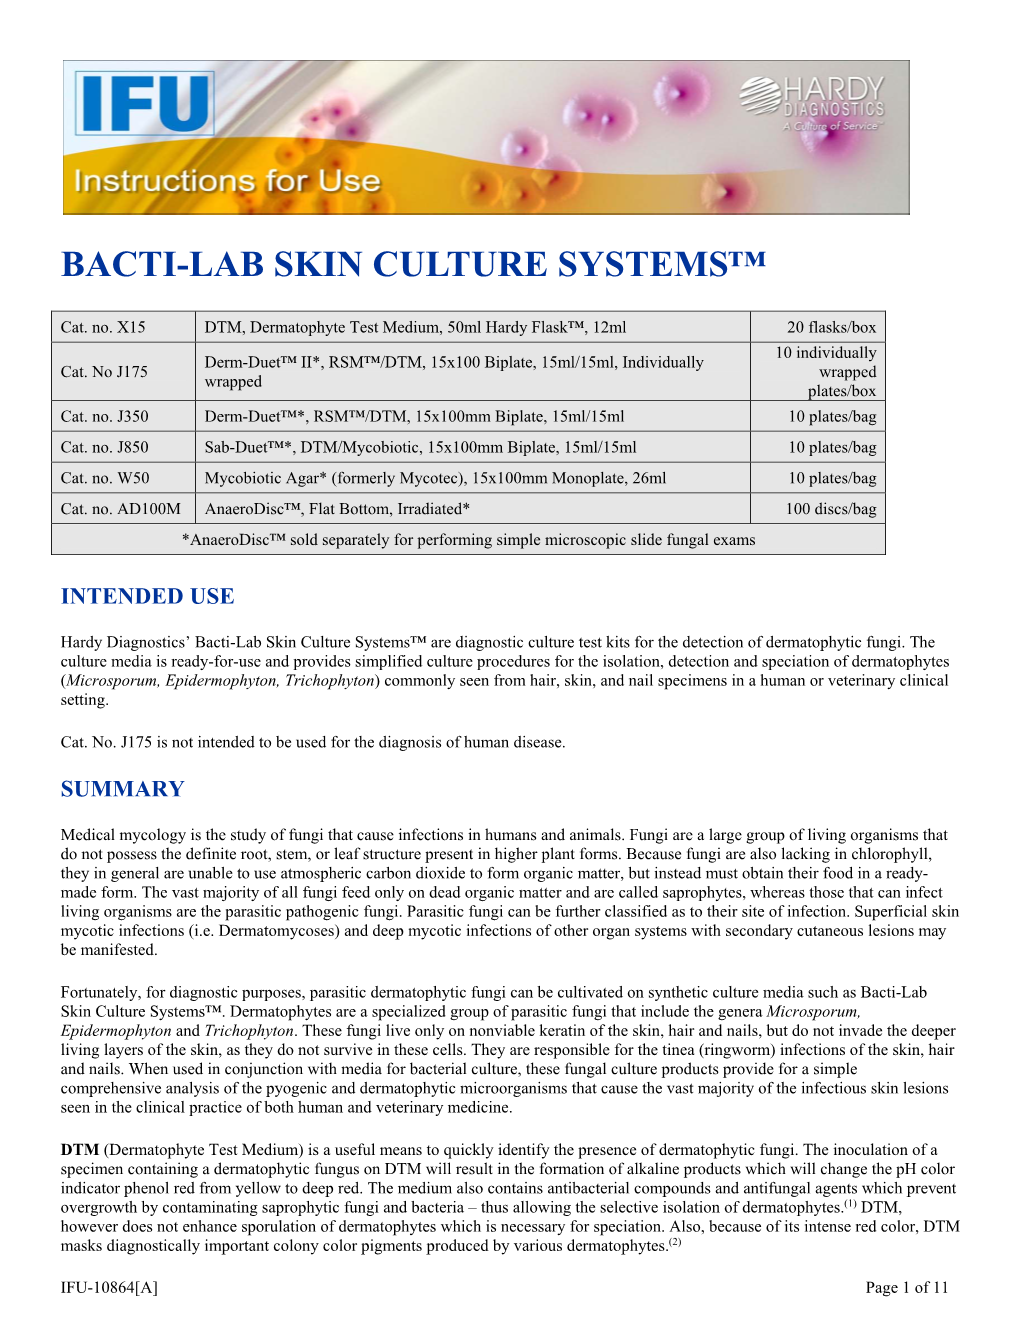 Bacti-Lab Skin Culture Systems™